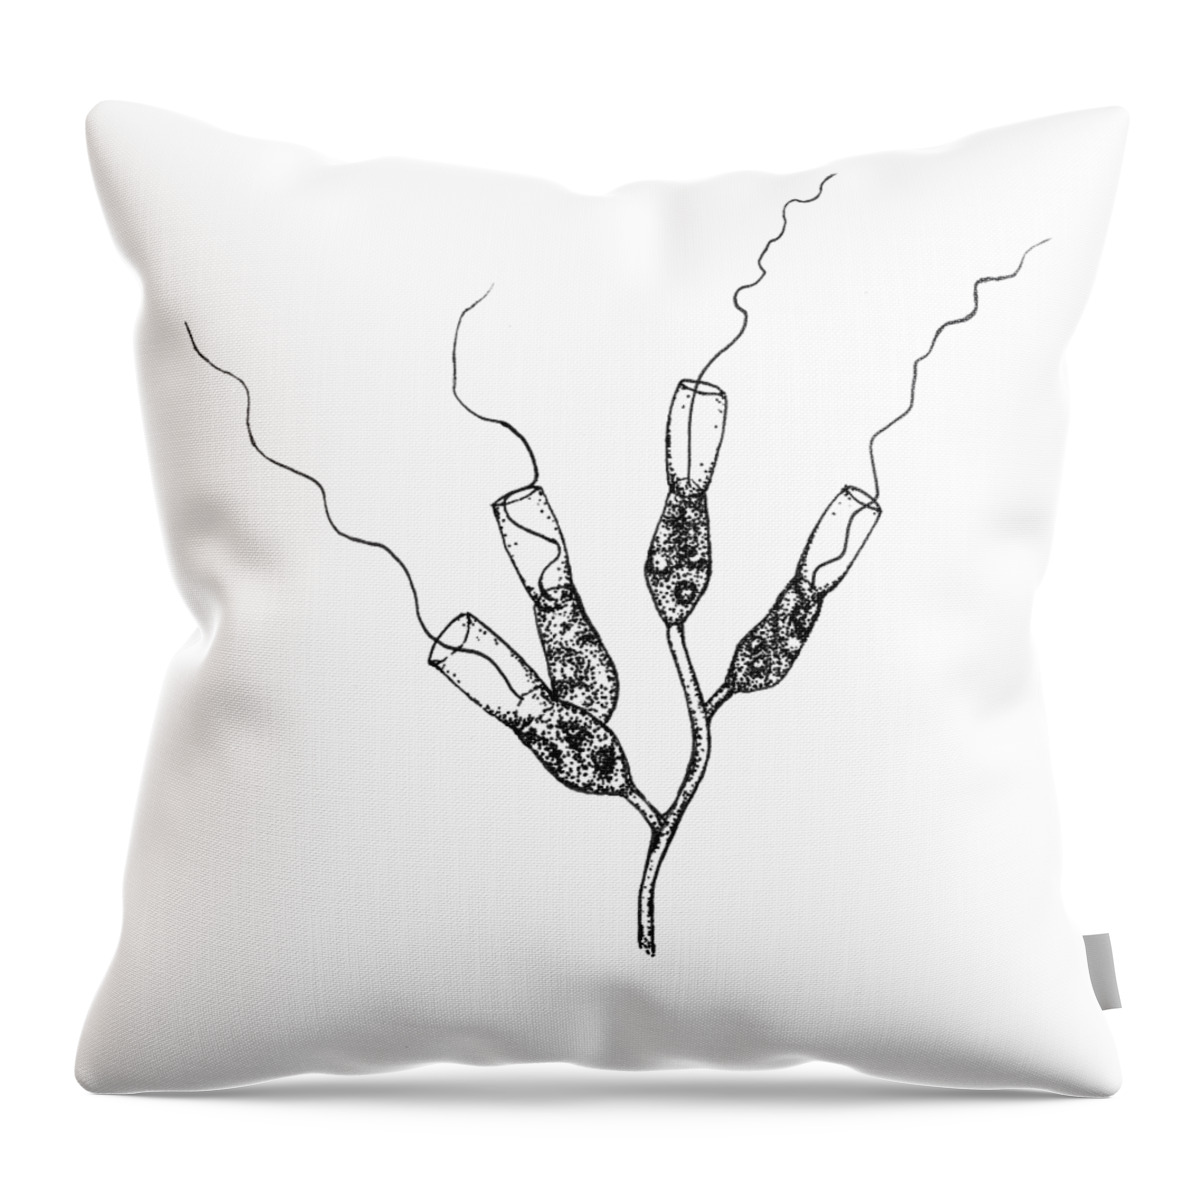 Protozoa Throw Pillow featuring the drawing Choanoflagellates by Kate Solbakk